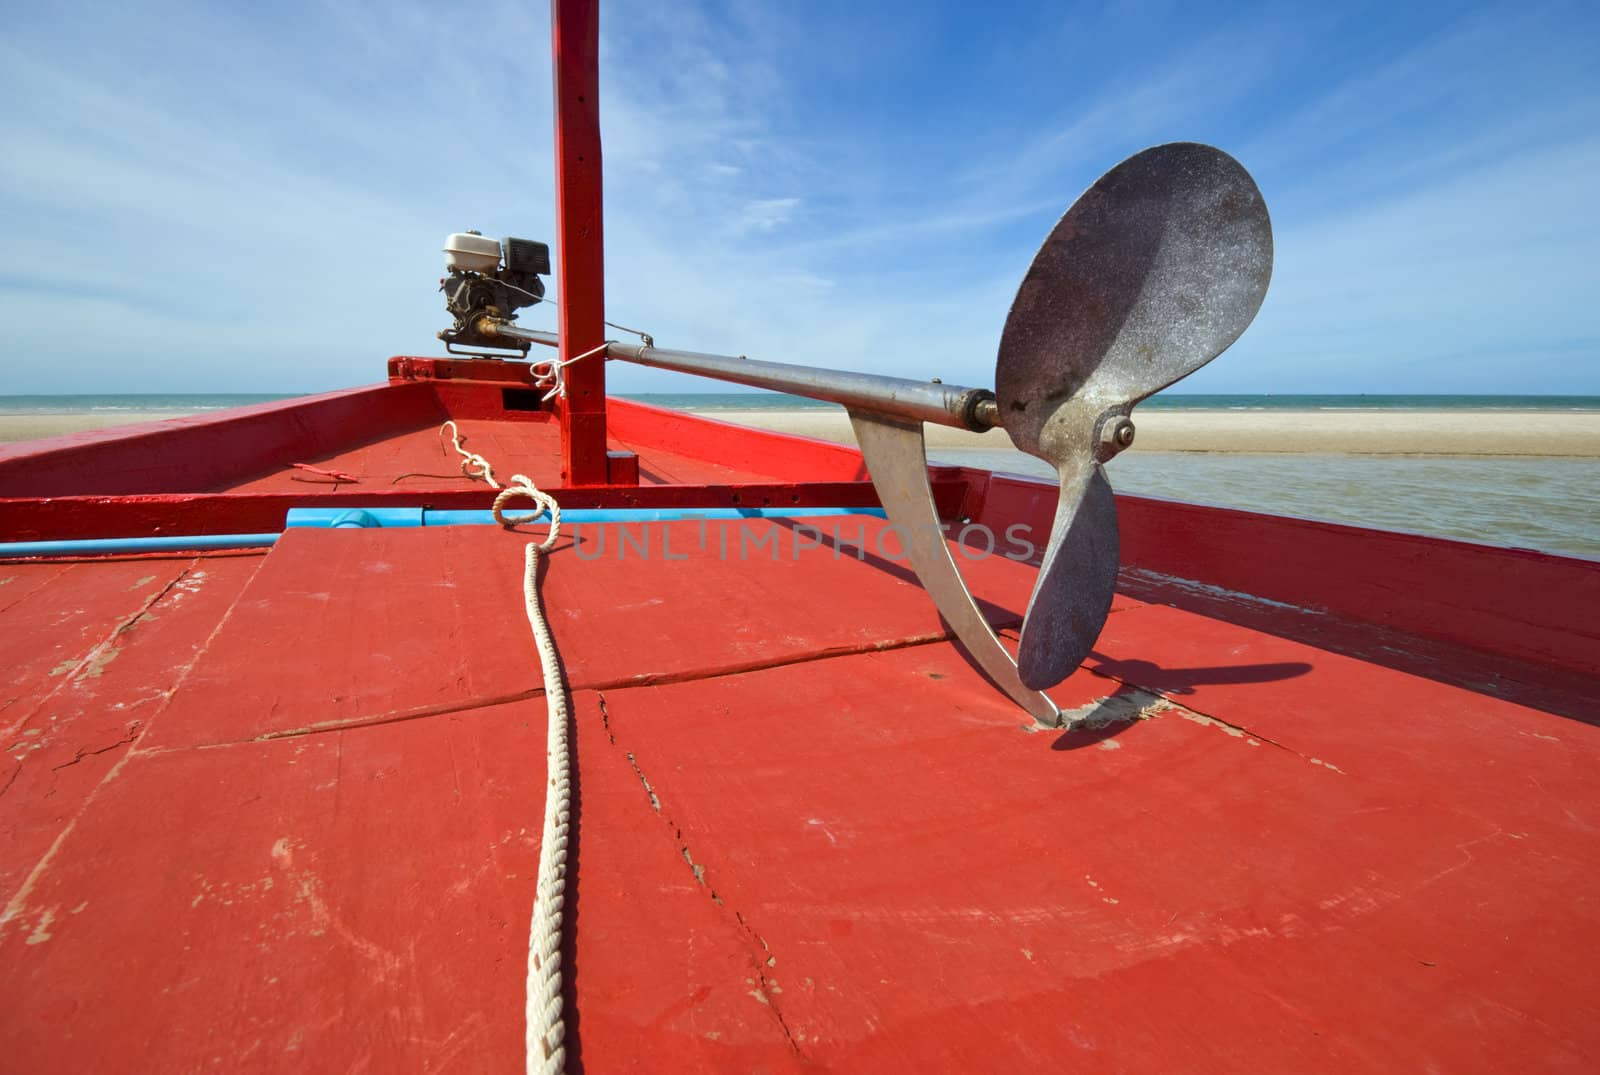 The propeller of red wooden fishing boat on the beach